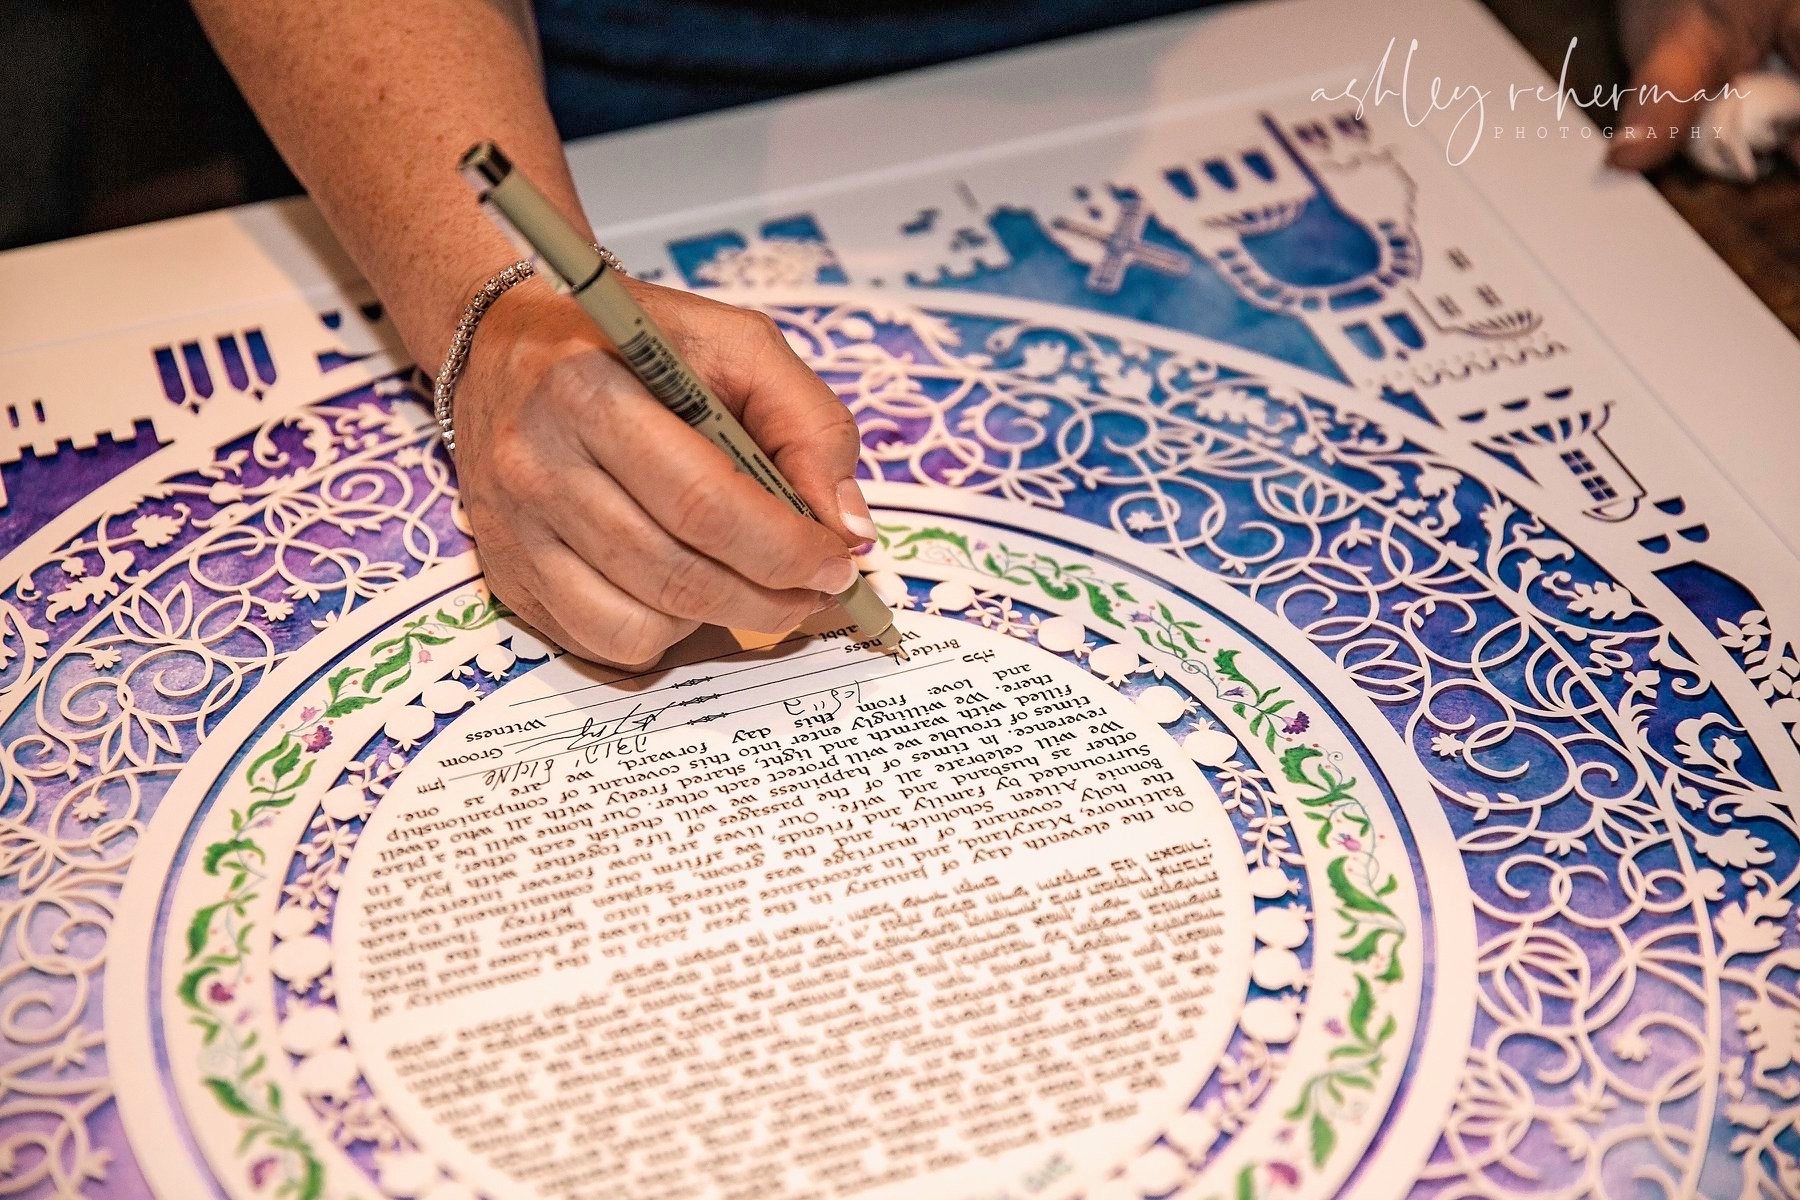 A close-up of a beautifully illustrated Ketubah highlighting intricate designs.